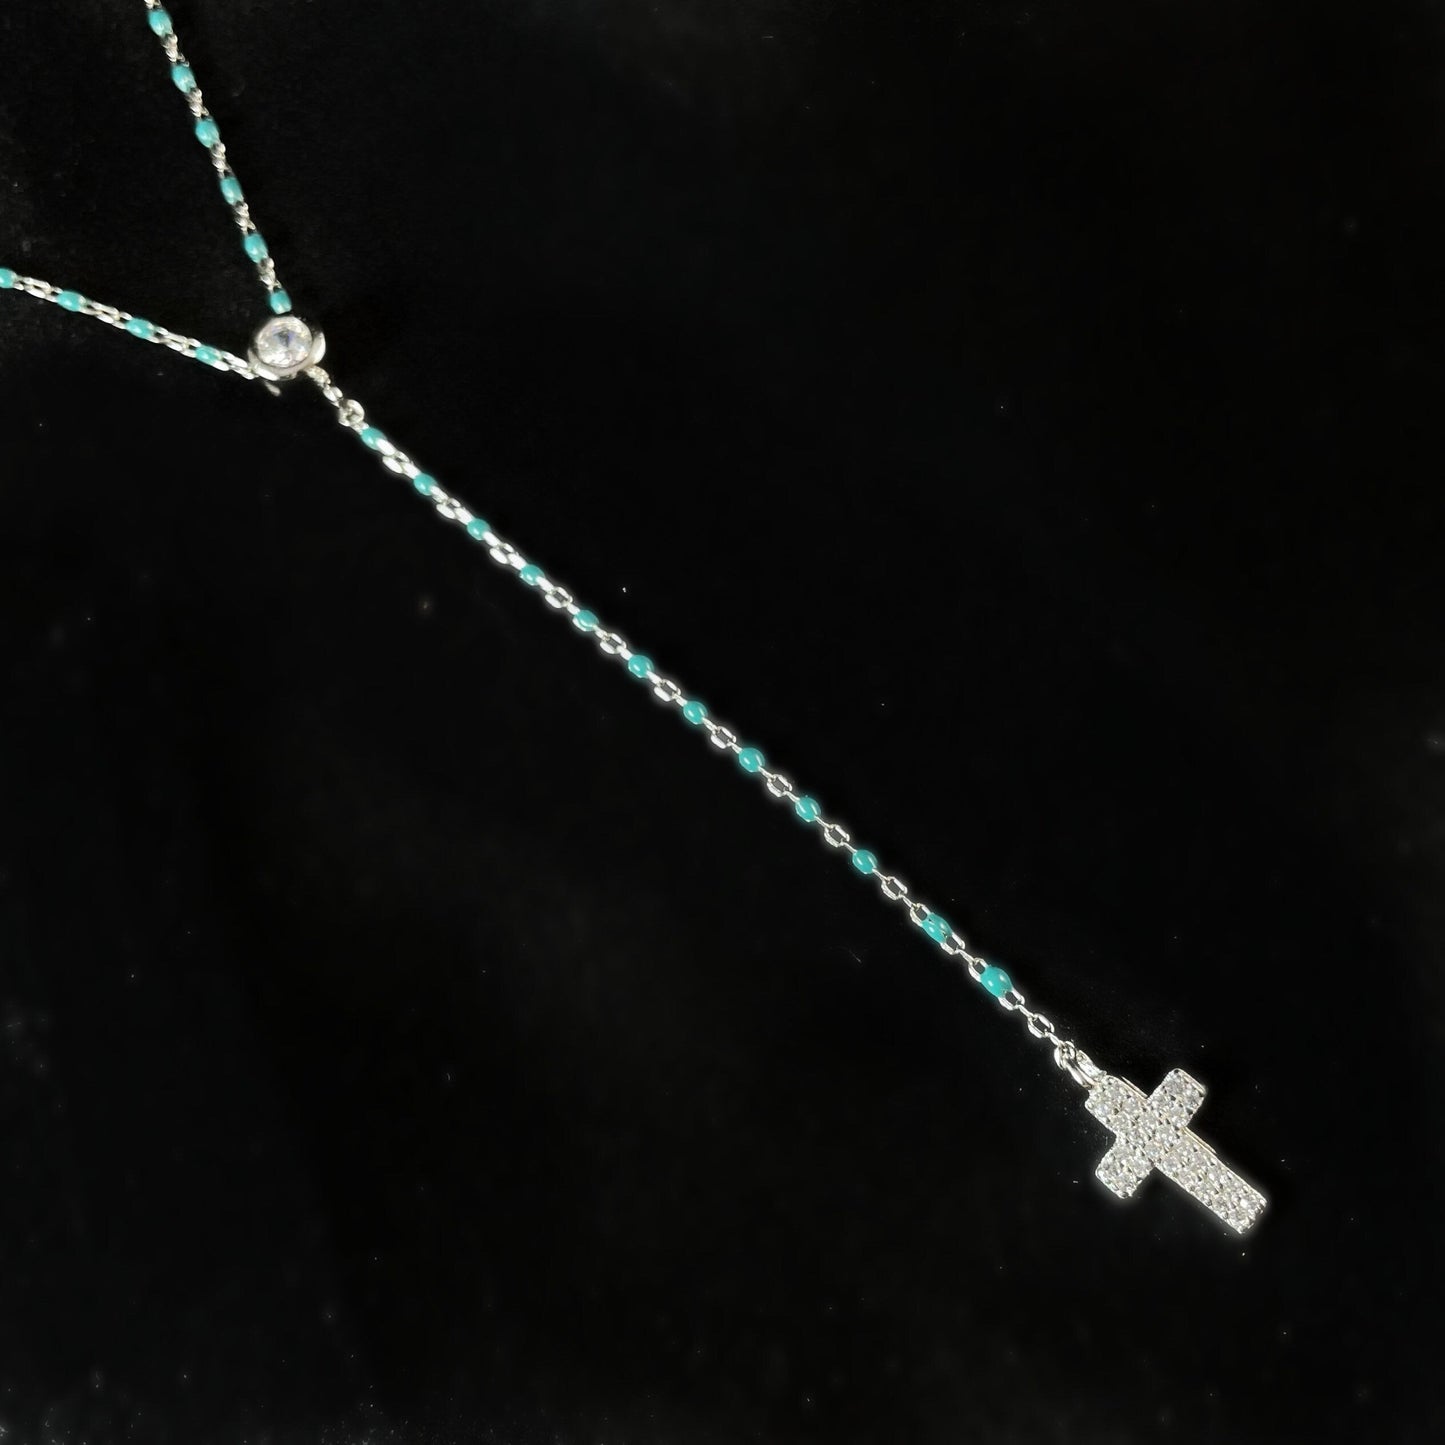 Silver Chain Necklace with Turquoise Beads and Crystal Cross - Handmade in Spain